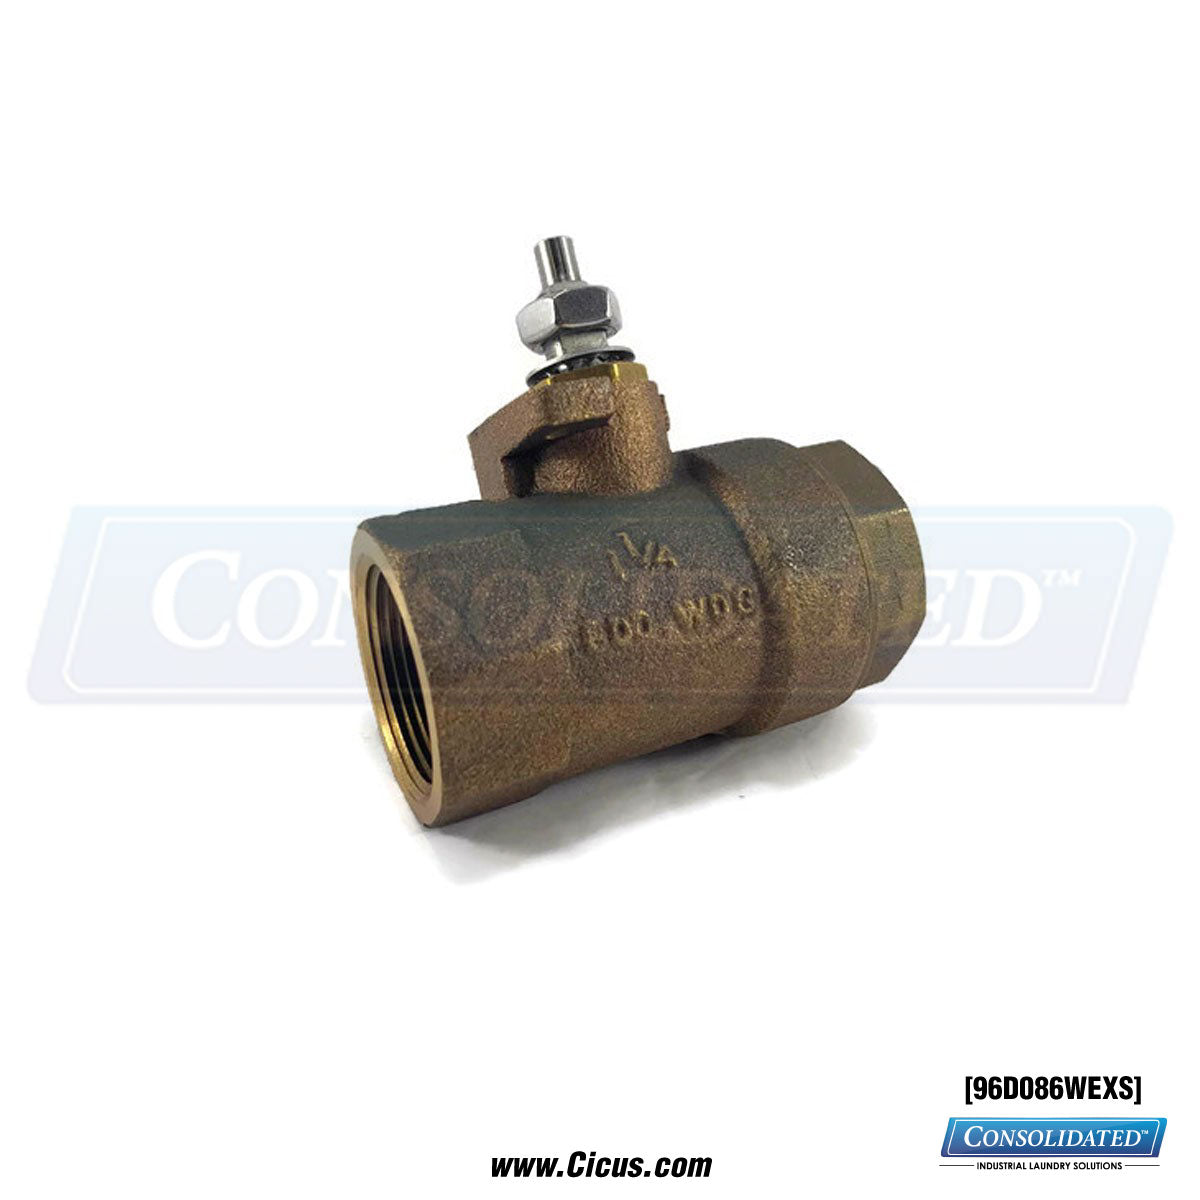 Milnor 1.25" Washer Ball Valve [96D086WEXS] - Side View